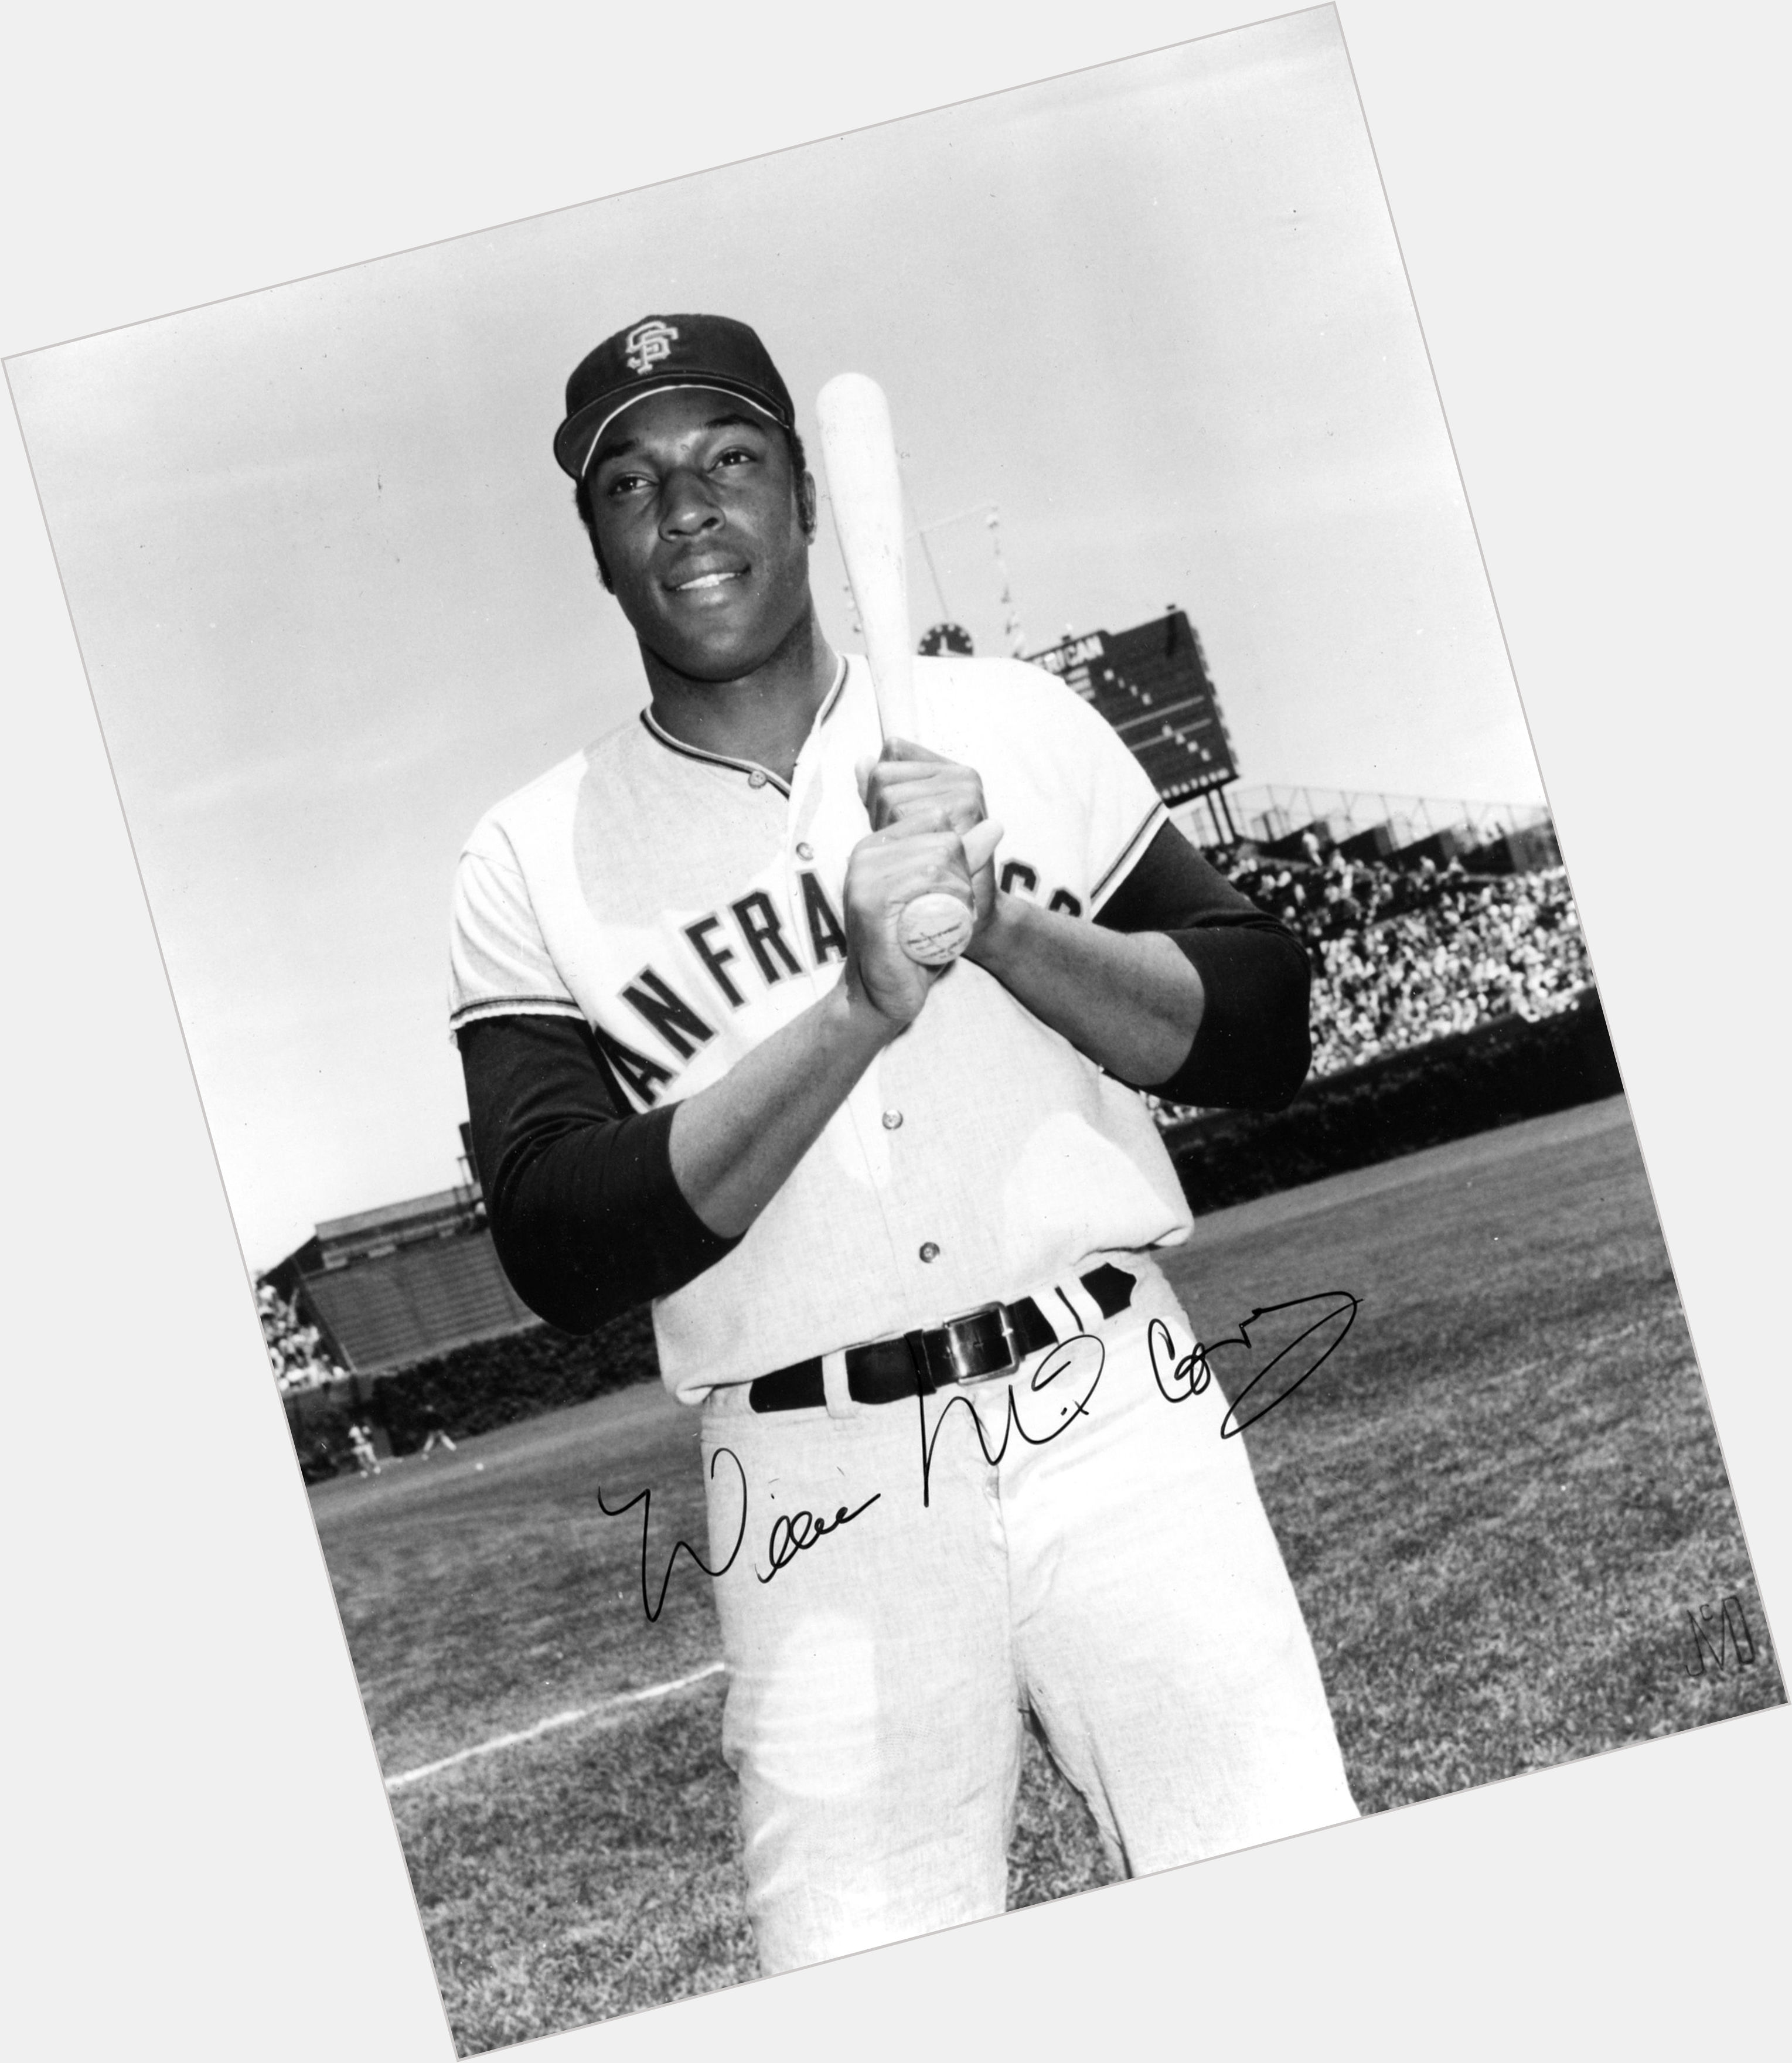 Willie Mccovey where who 3